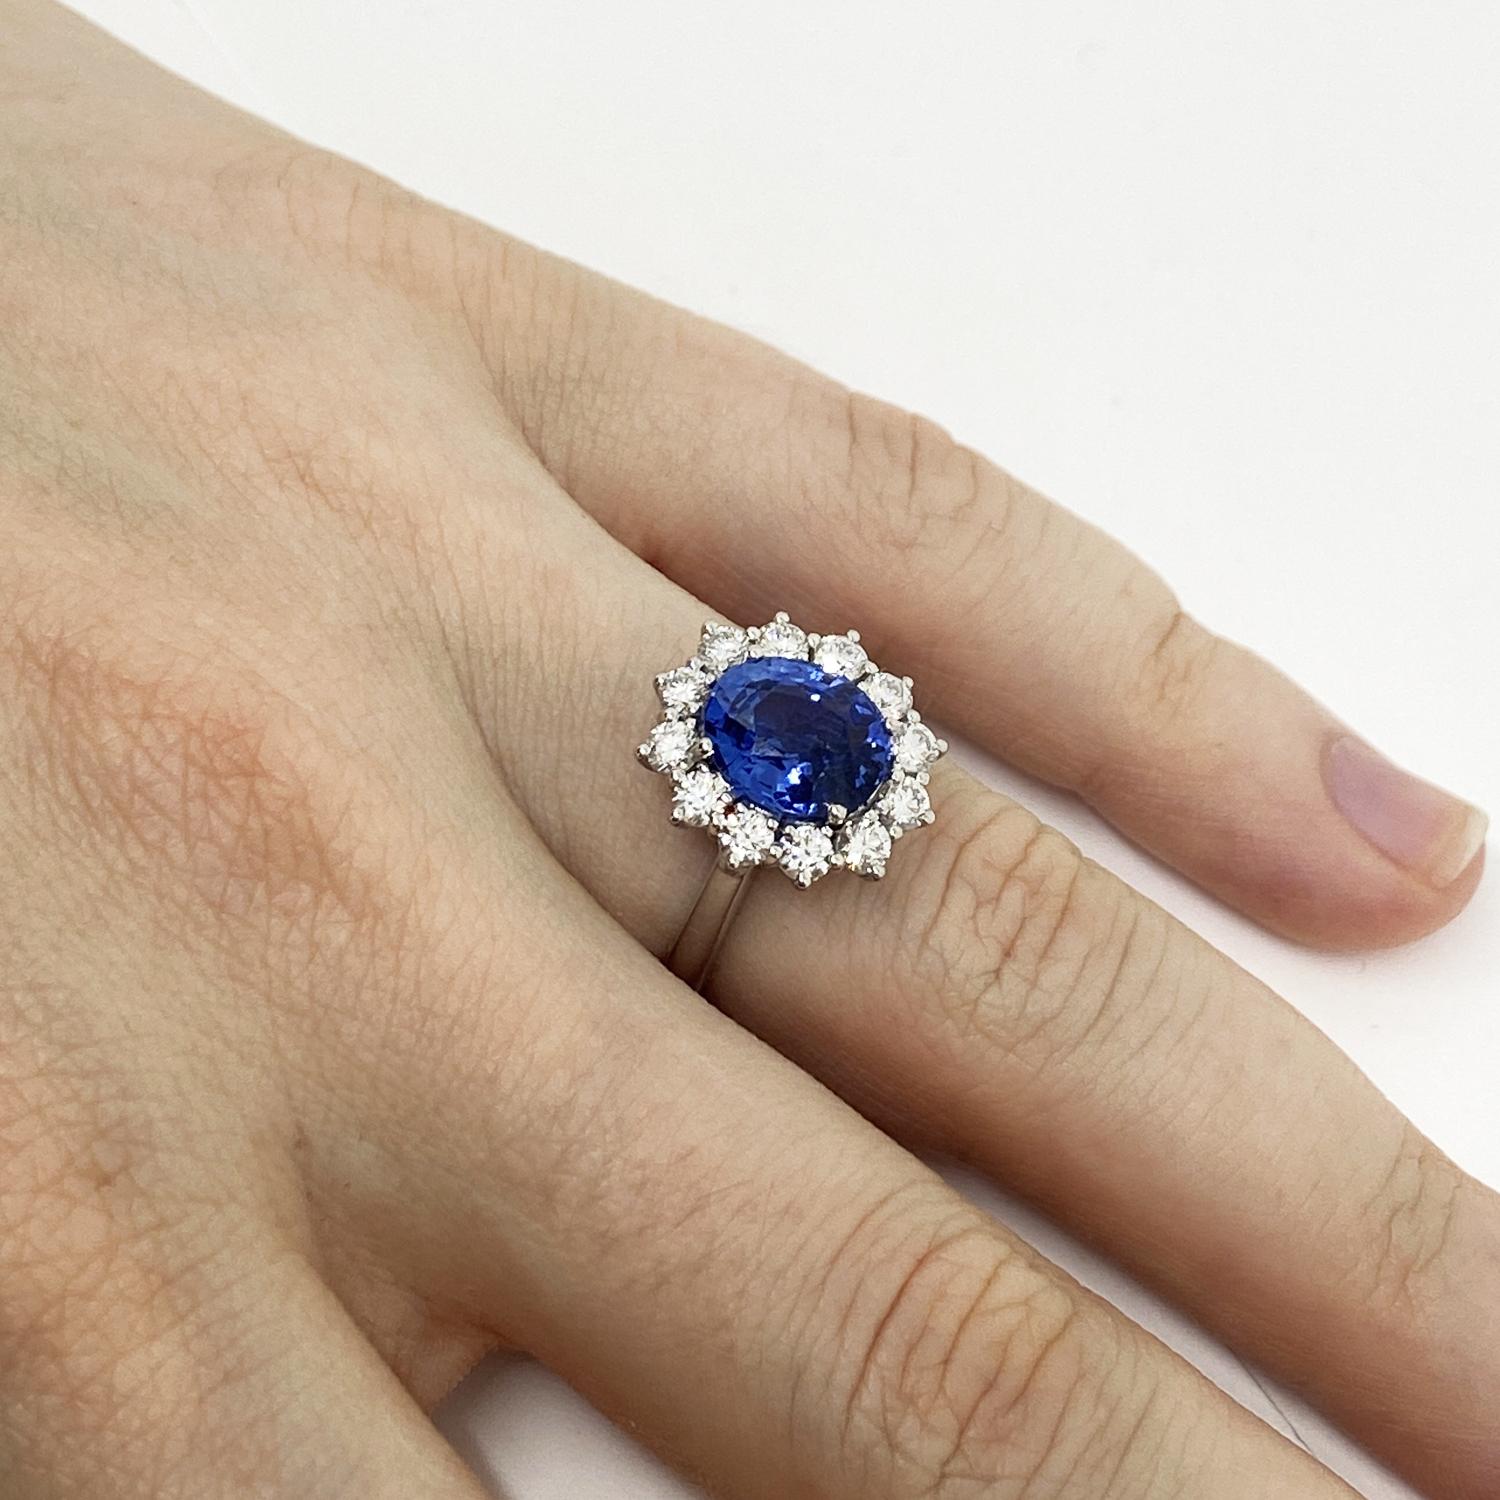 Ring made of 18kt white gold with natural brilliant-cut white diamonds for ct.0.87 and natural oval blue sapphire for ct.2.92
-------------------------------------------------

Important Note : In order to speed up the publishing process of our vast